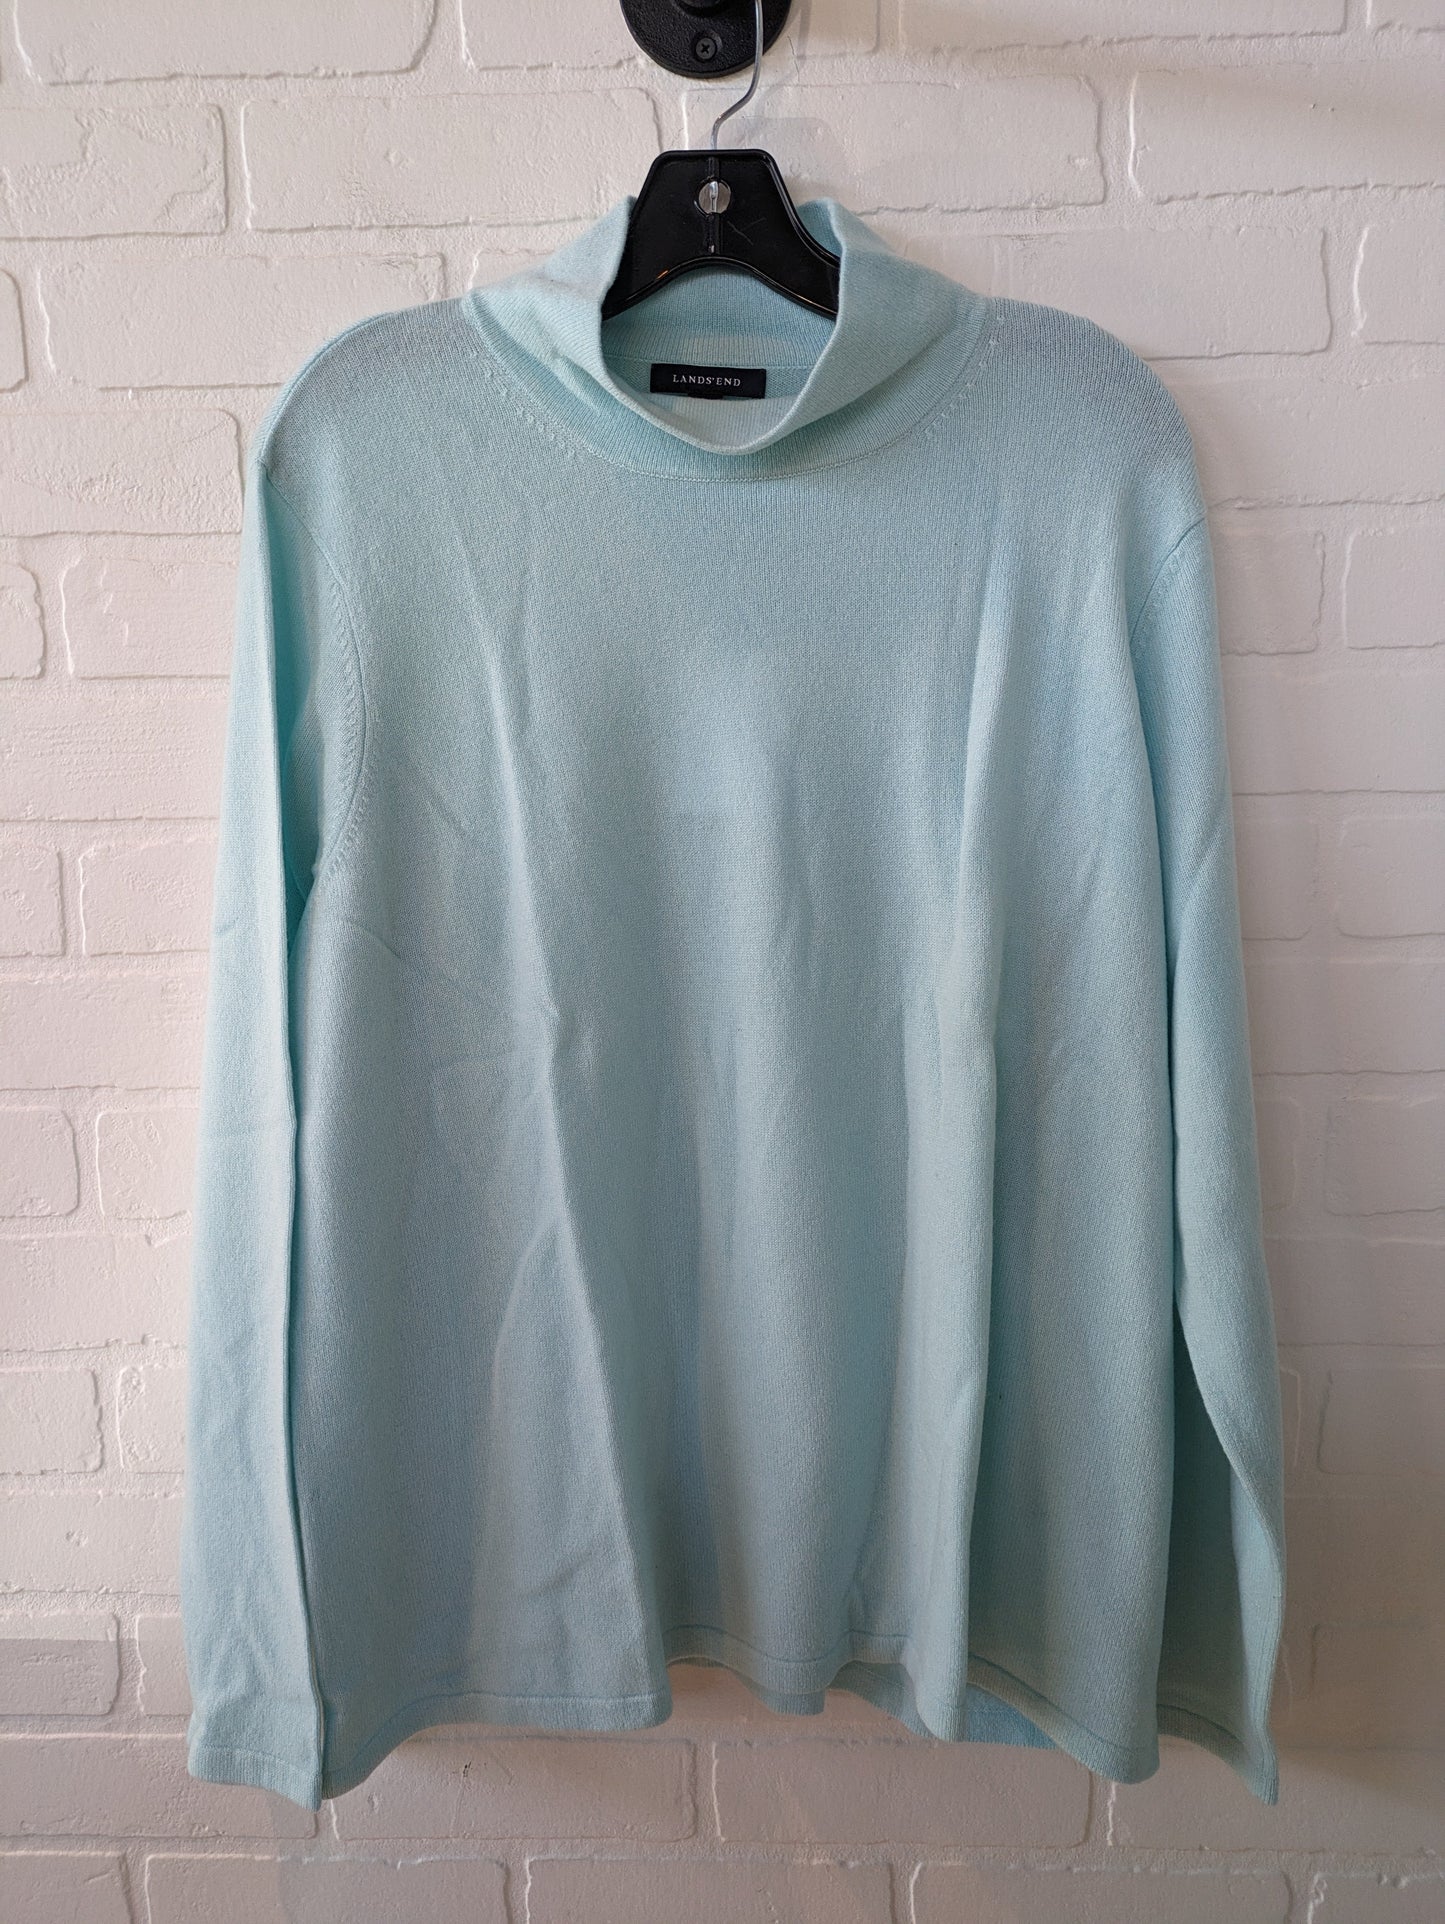 Sweater By Lands End  Size: 2x